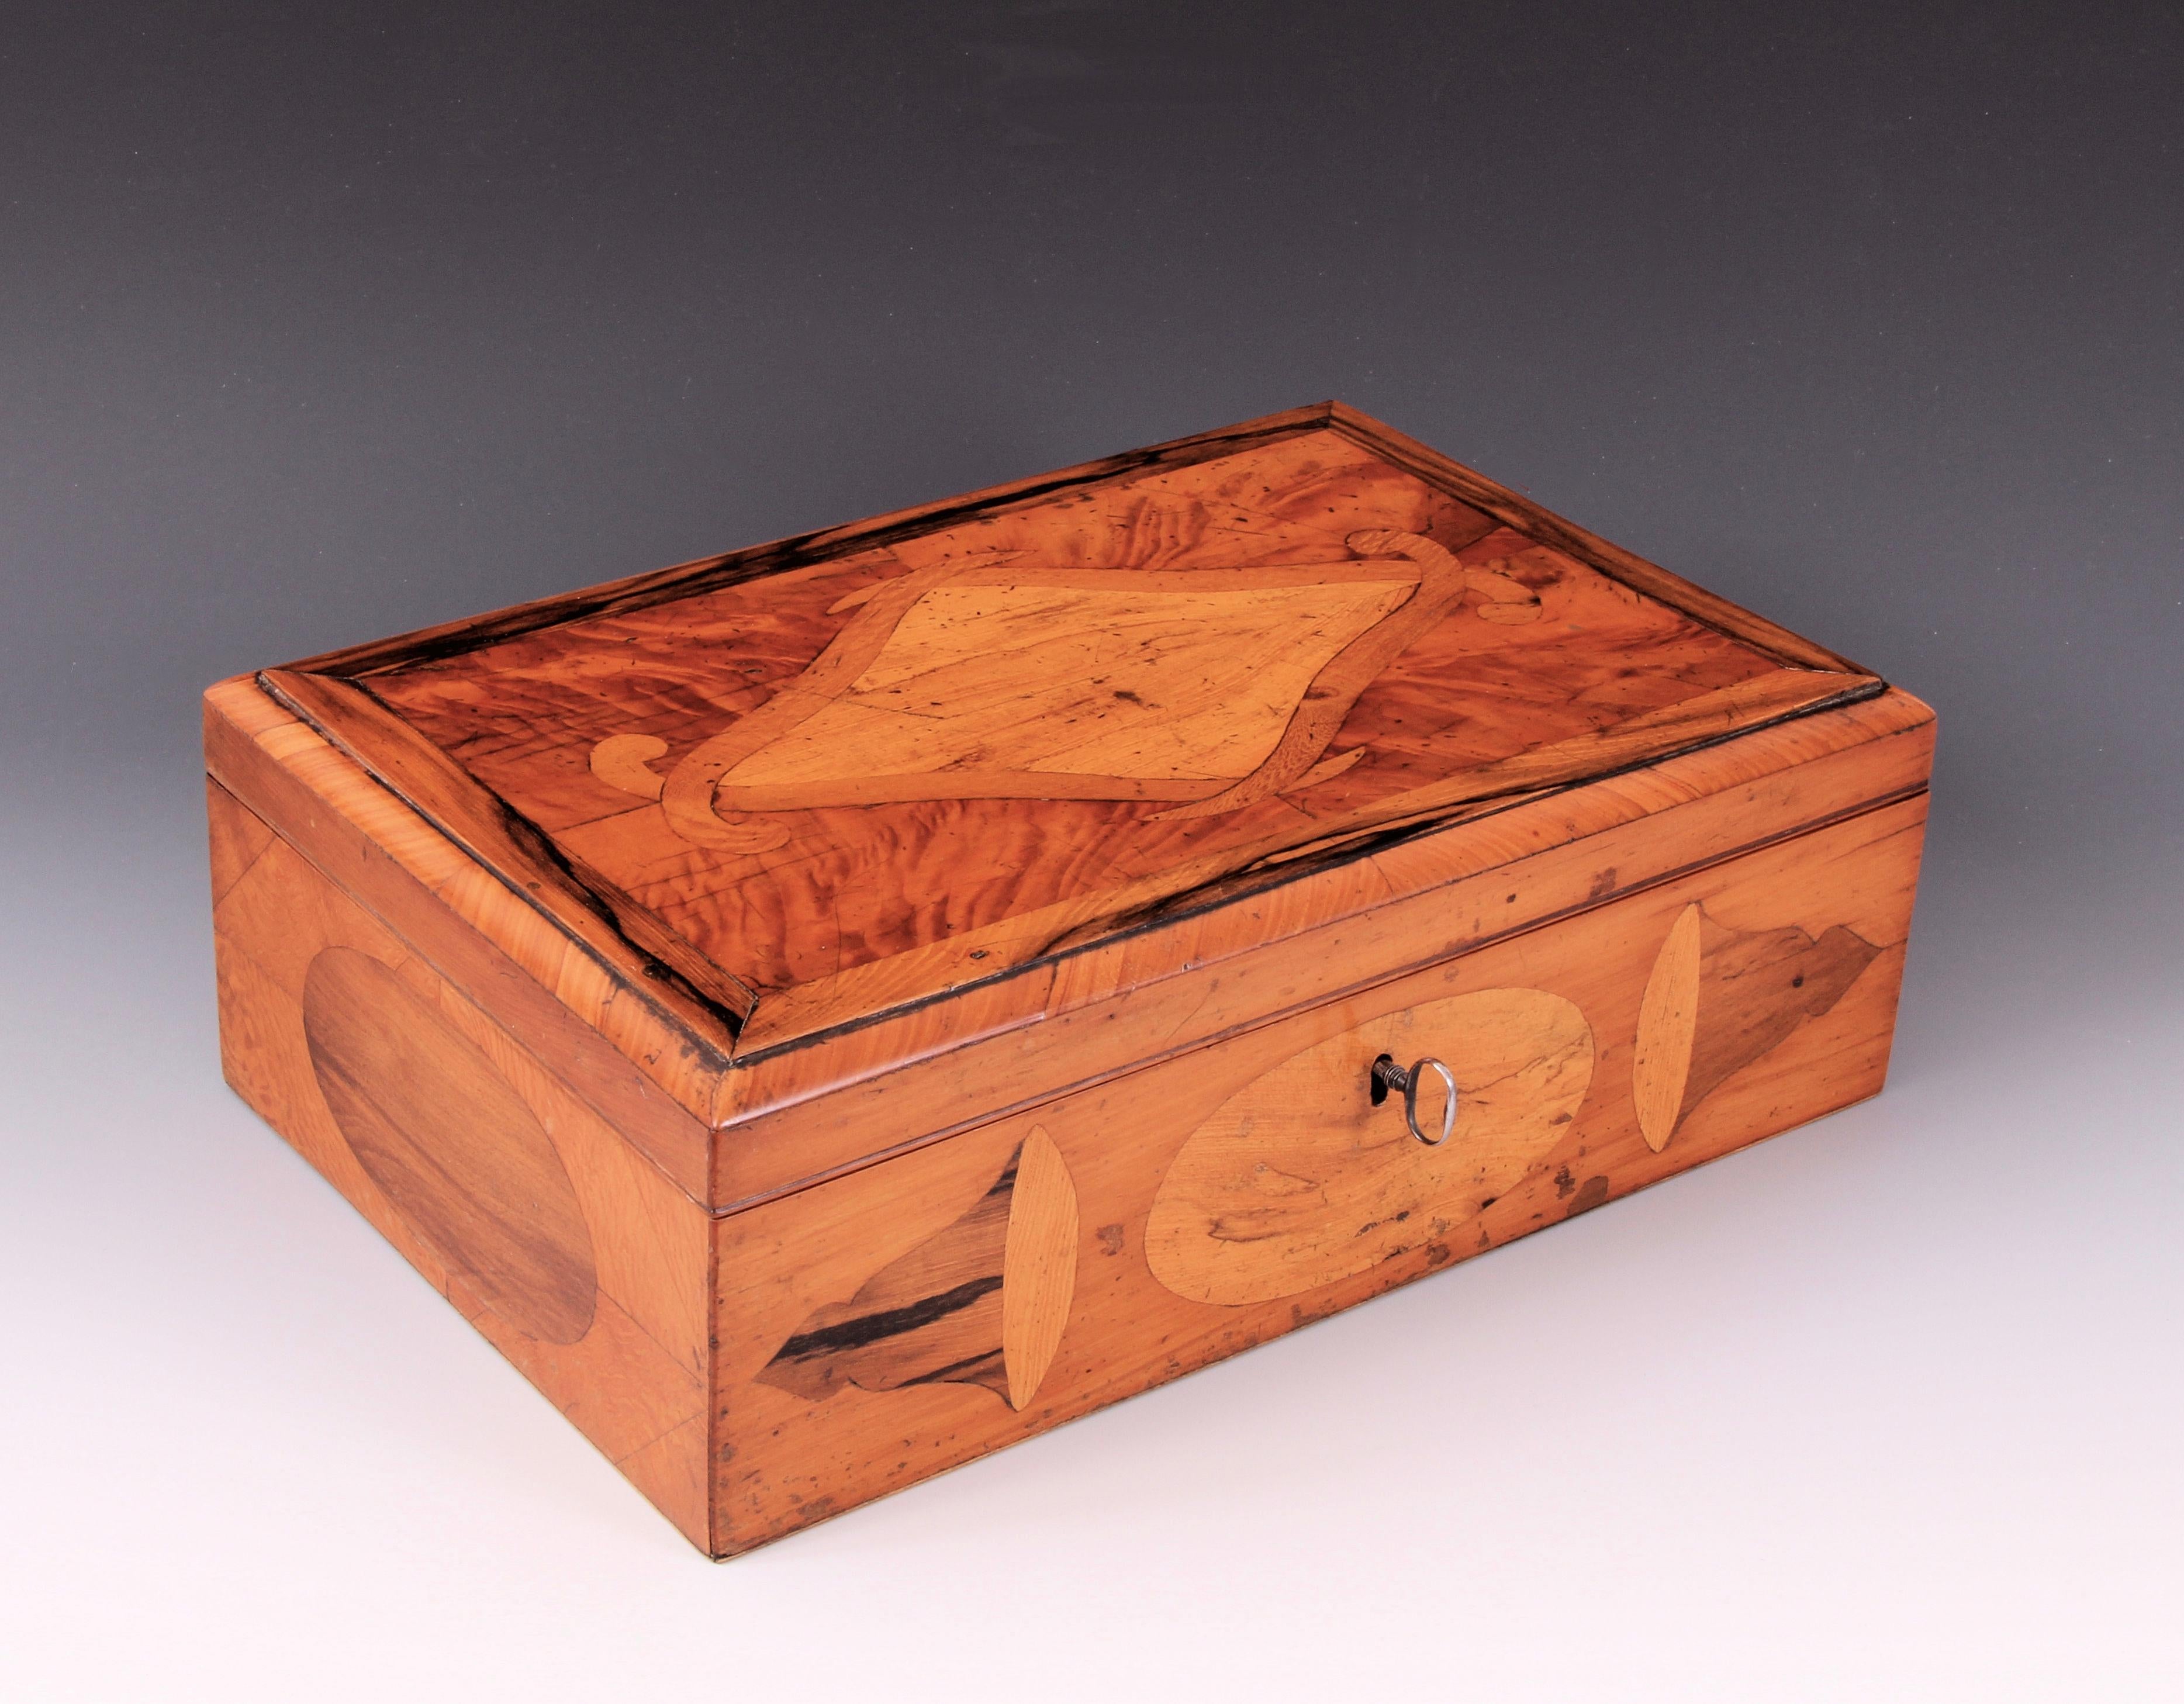 Extremely rare early 19th century New Zealand specimen wood casket.

An early example with a wonderful color and patina

Beautifully made using native New Zealand timbers

Visually beautiful with multiple uses

This superb piece incorporates